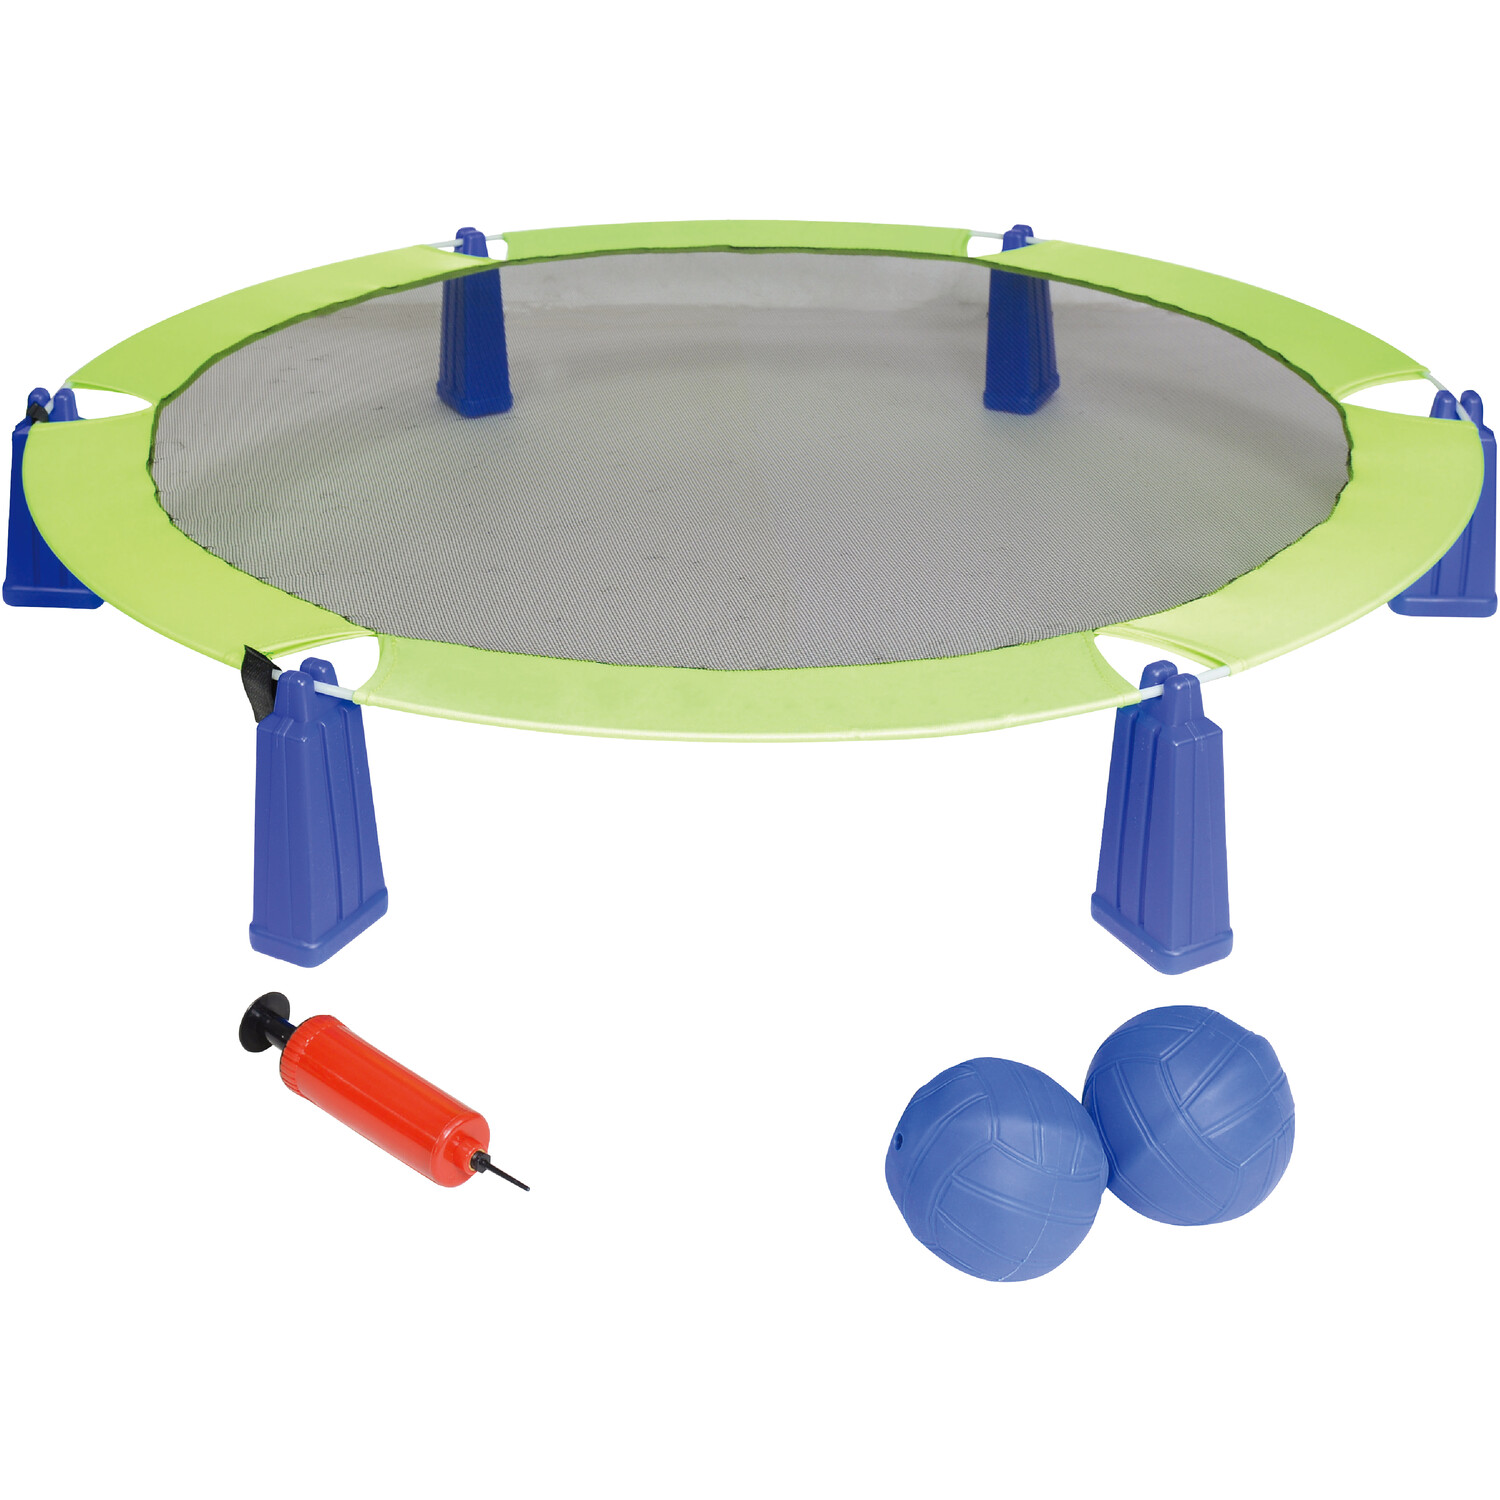 2-in-1 Bounce and Frisbee Set - Blue Image 1